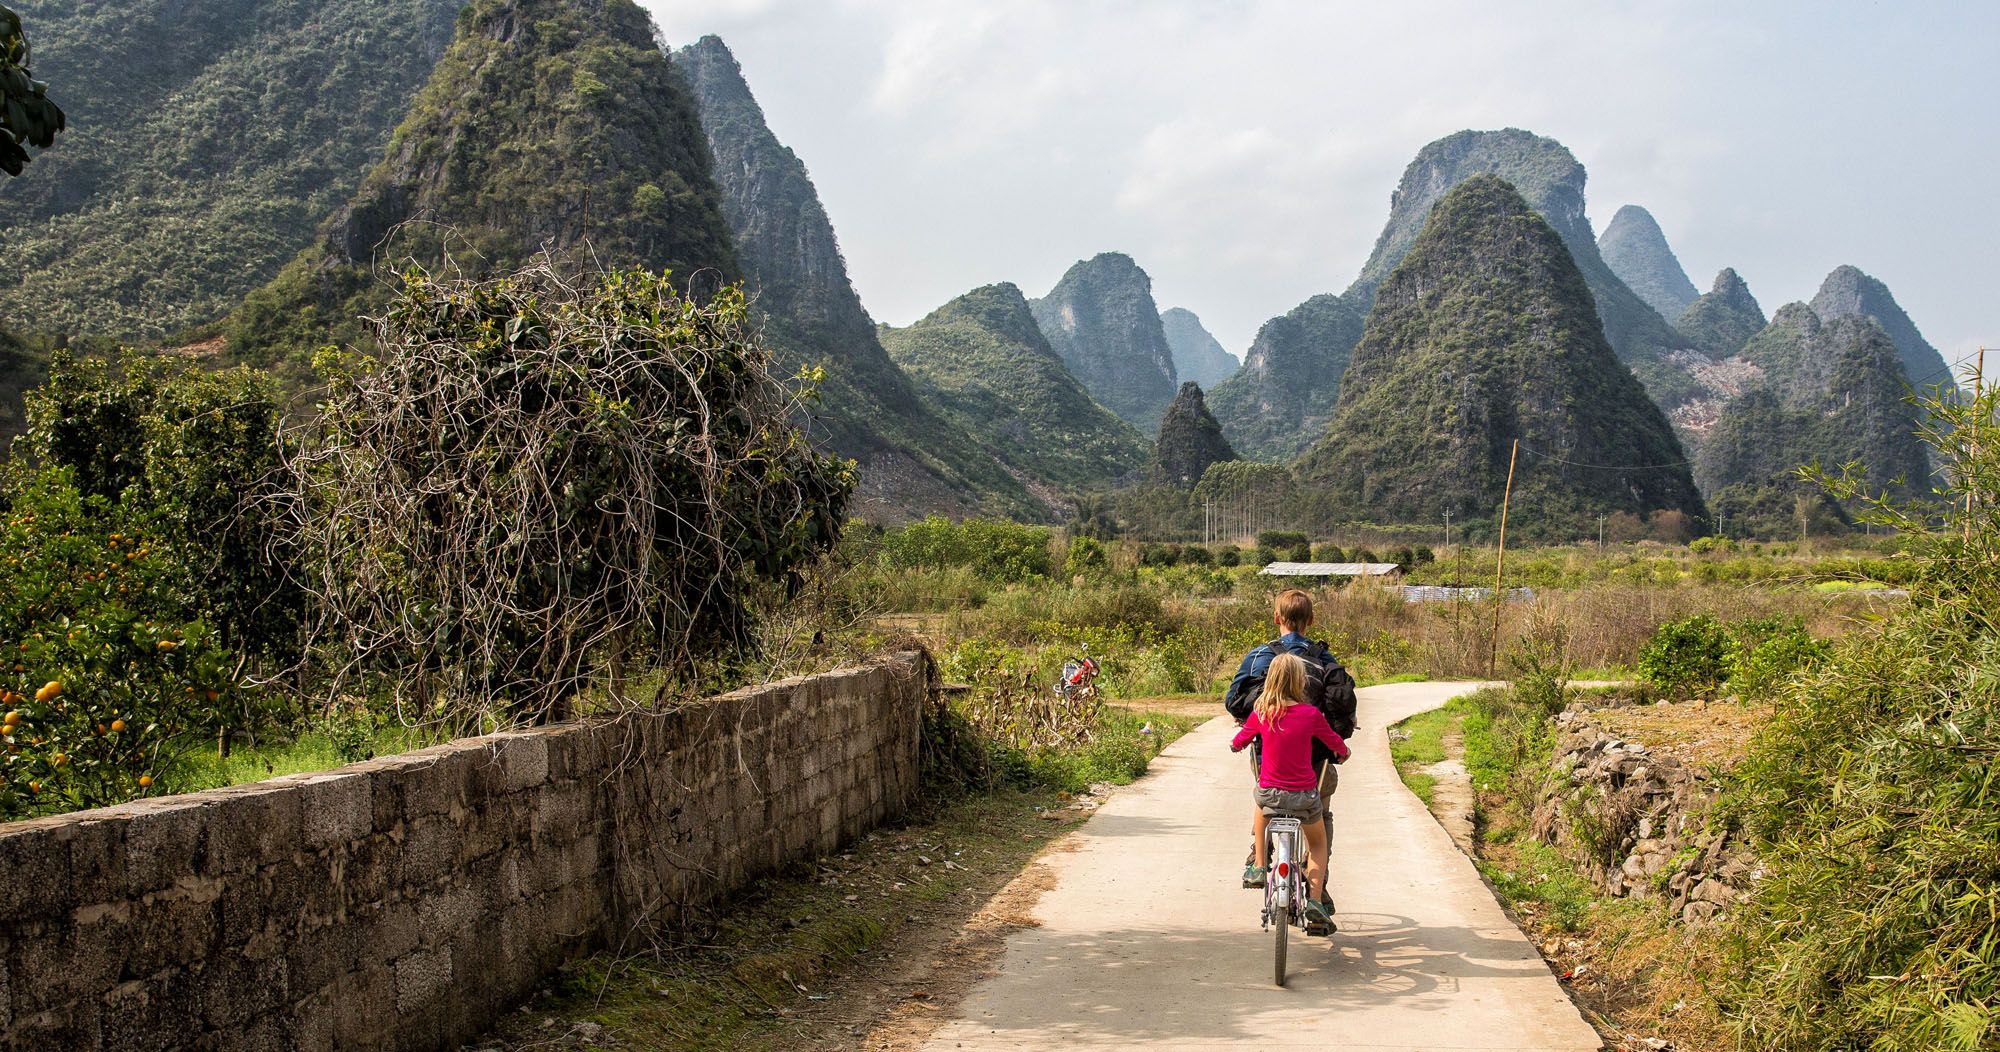 Featured image for “Cycling the Li River Valley from Xingping, China”